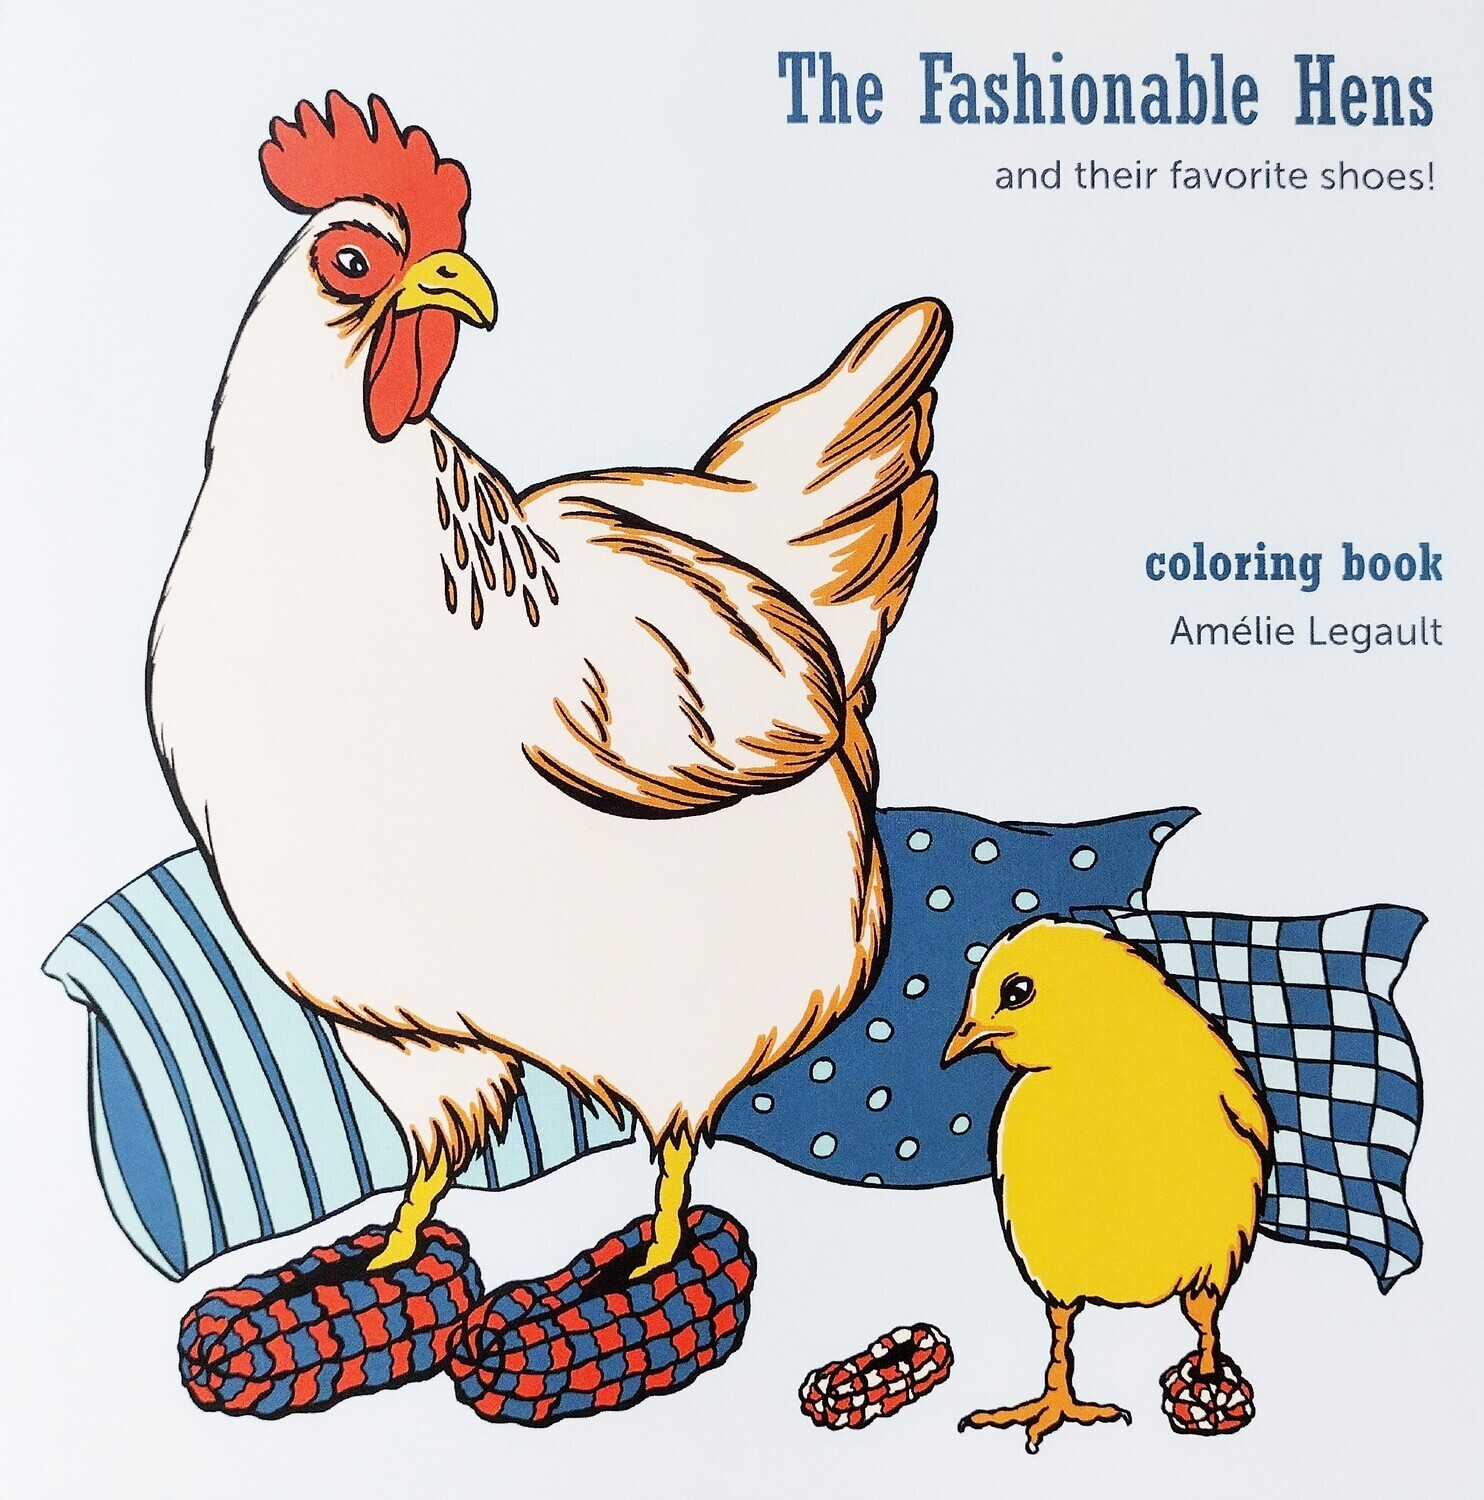 The Fashionable Hens - Coloring Book by Amelie Legault